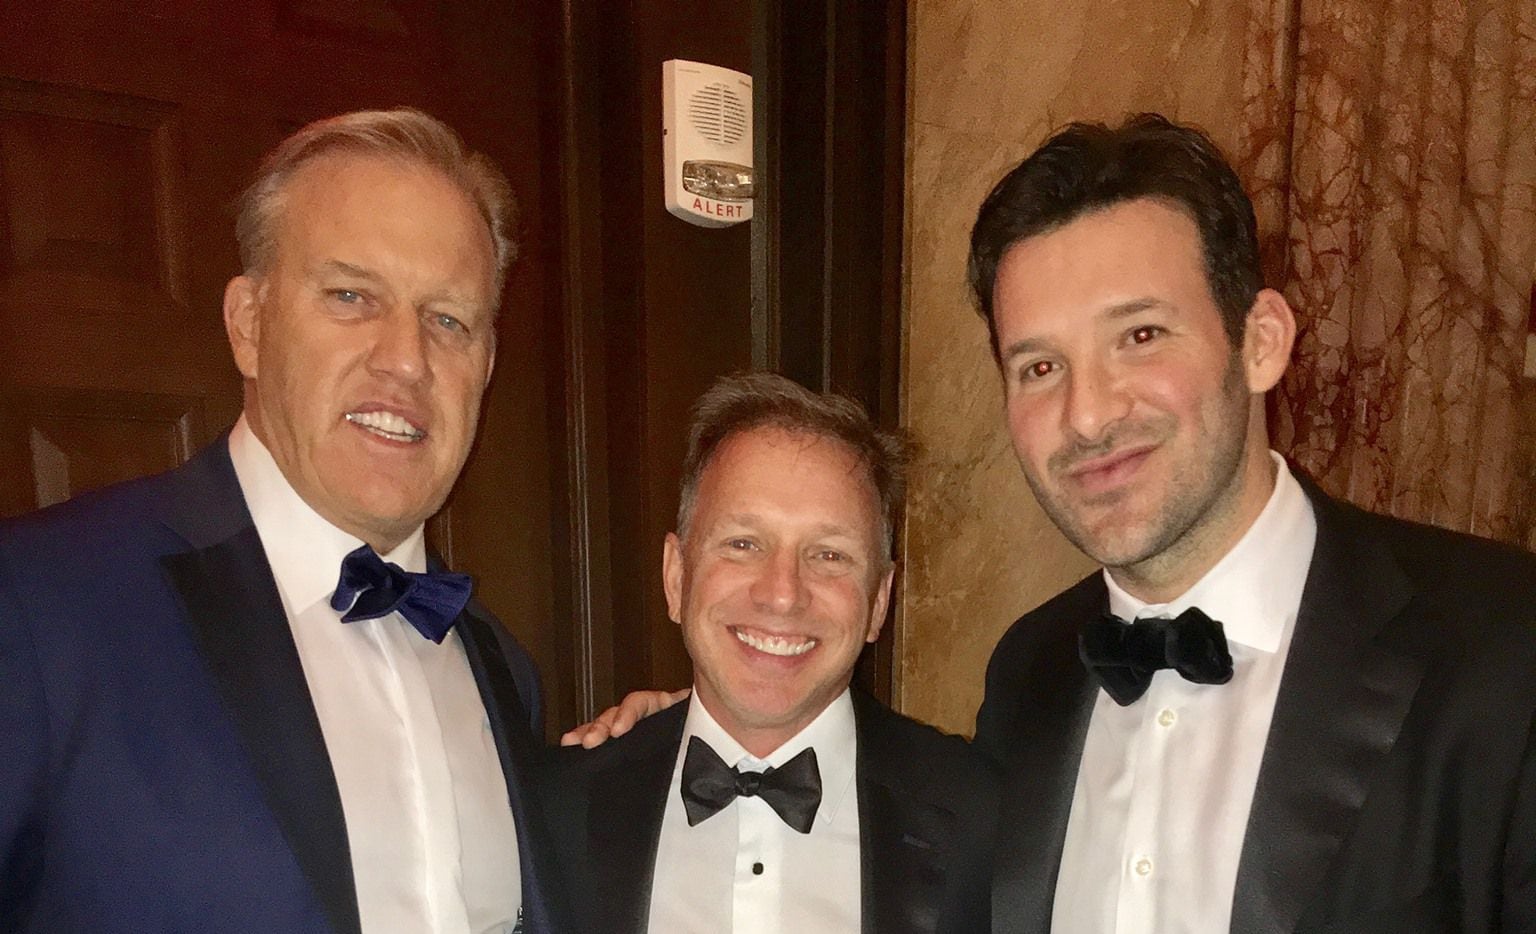 Broncos vice president and general manager John Elway (L), Tony Romo (R)